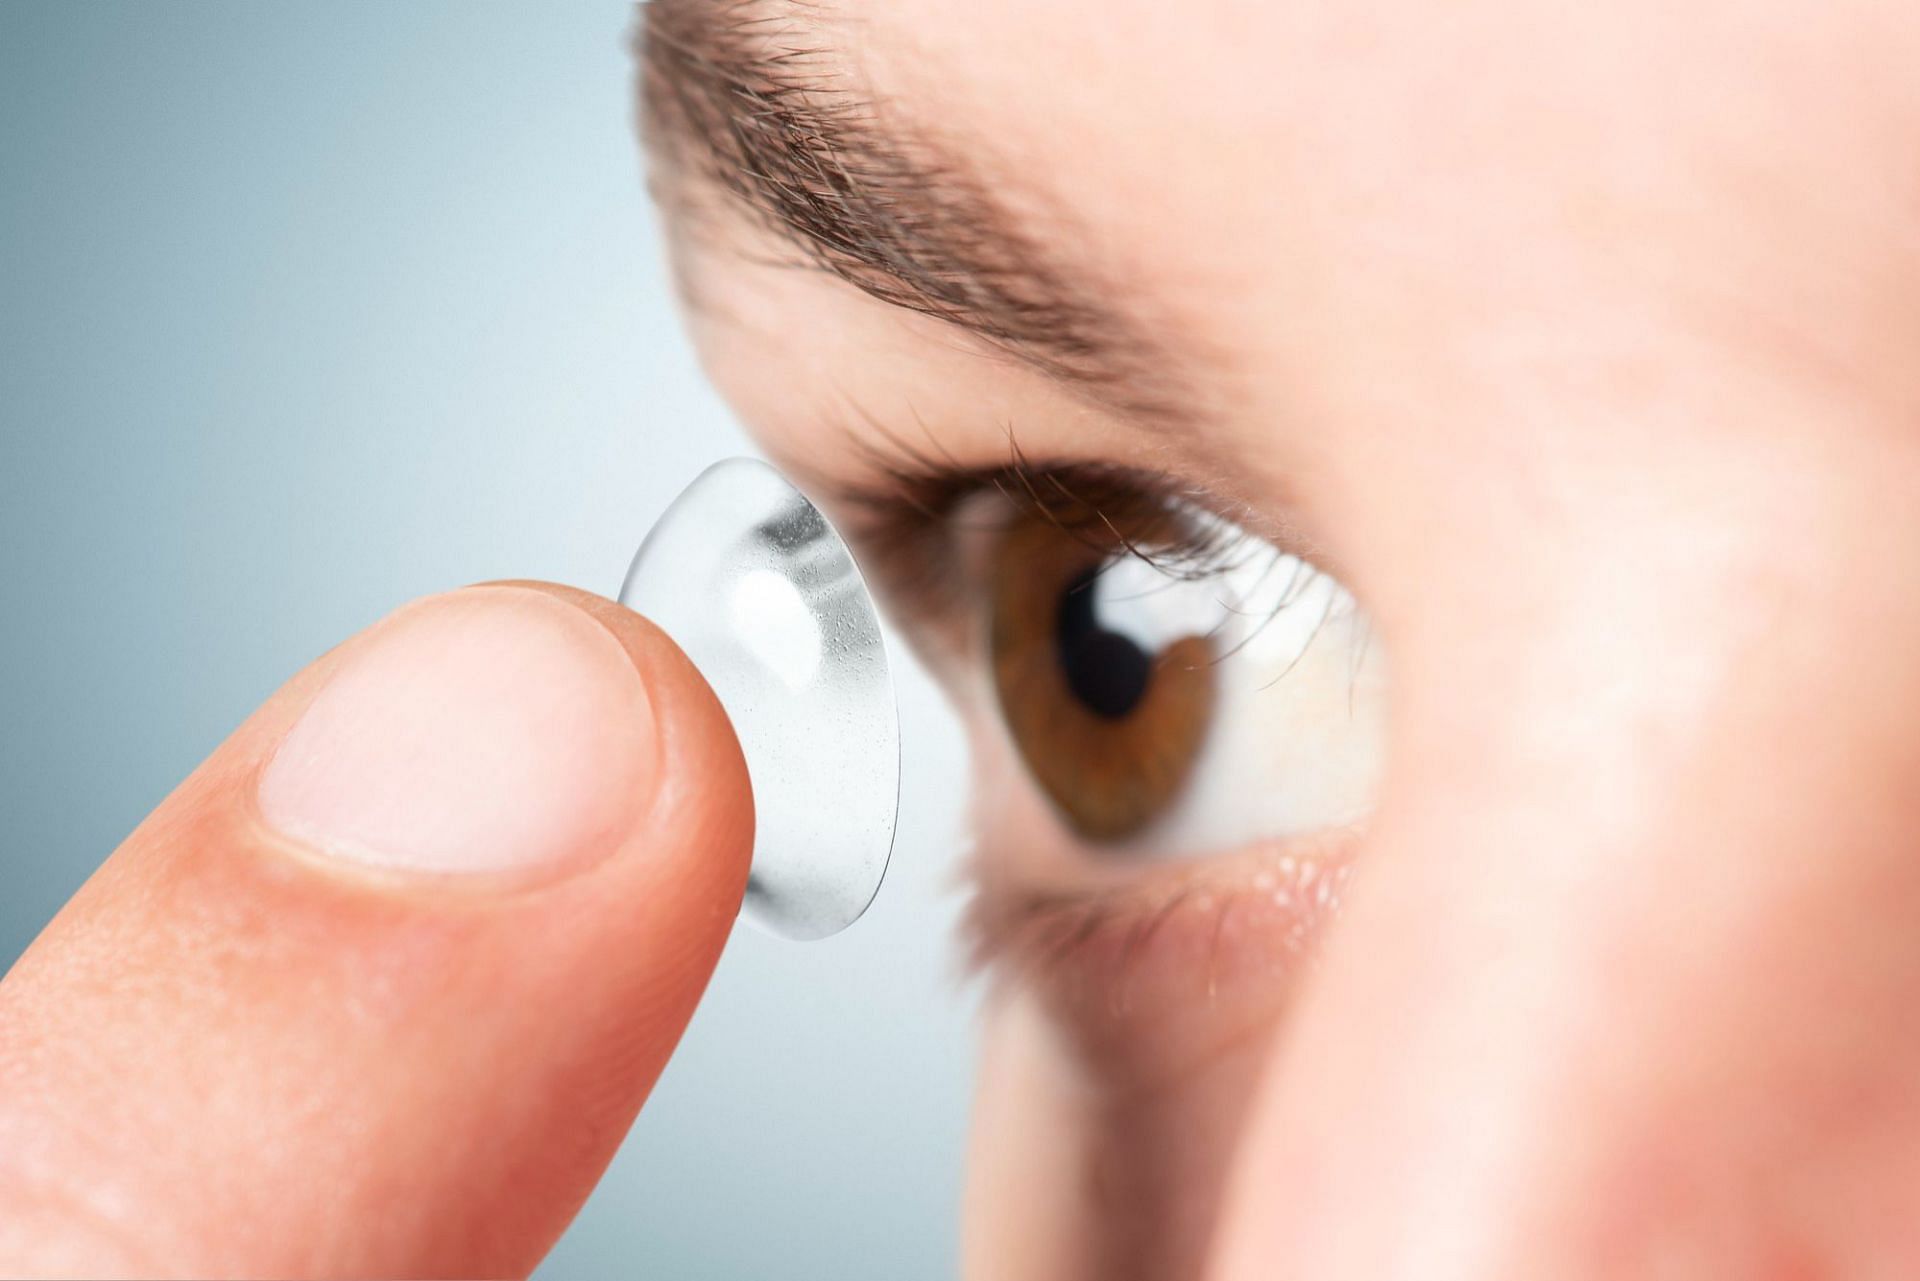 Wearing unclean or dirty lenses can cause giant papillary conjunctivitis(Image by rawpixel.com on Freepik)